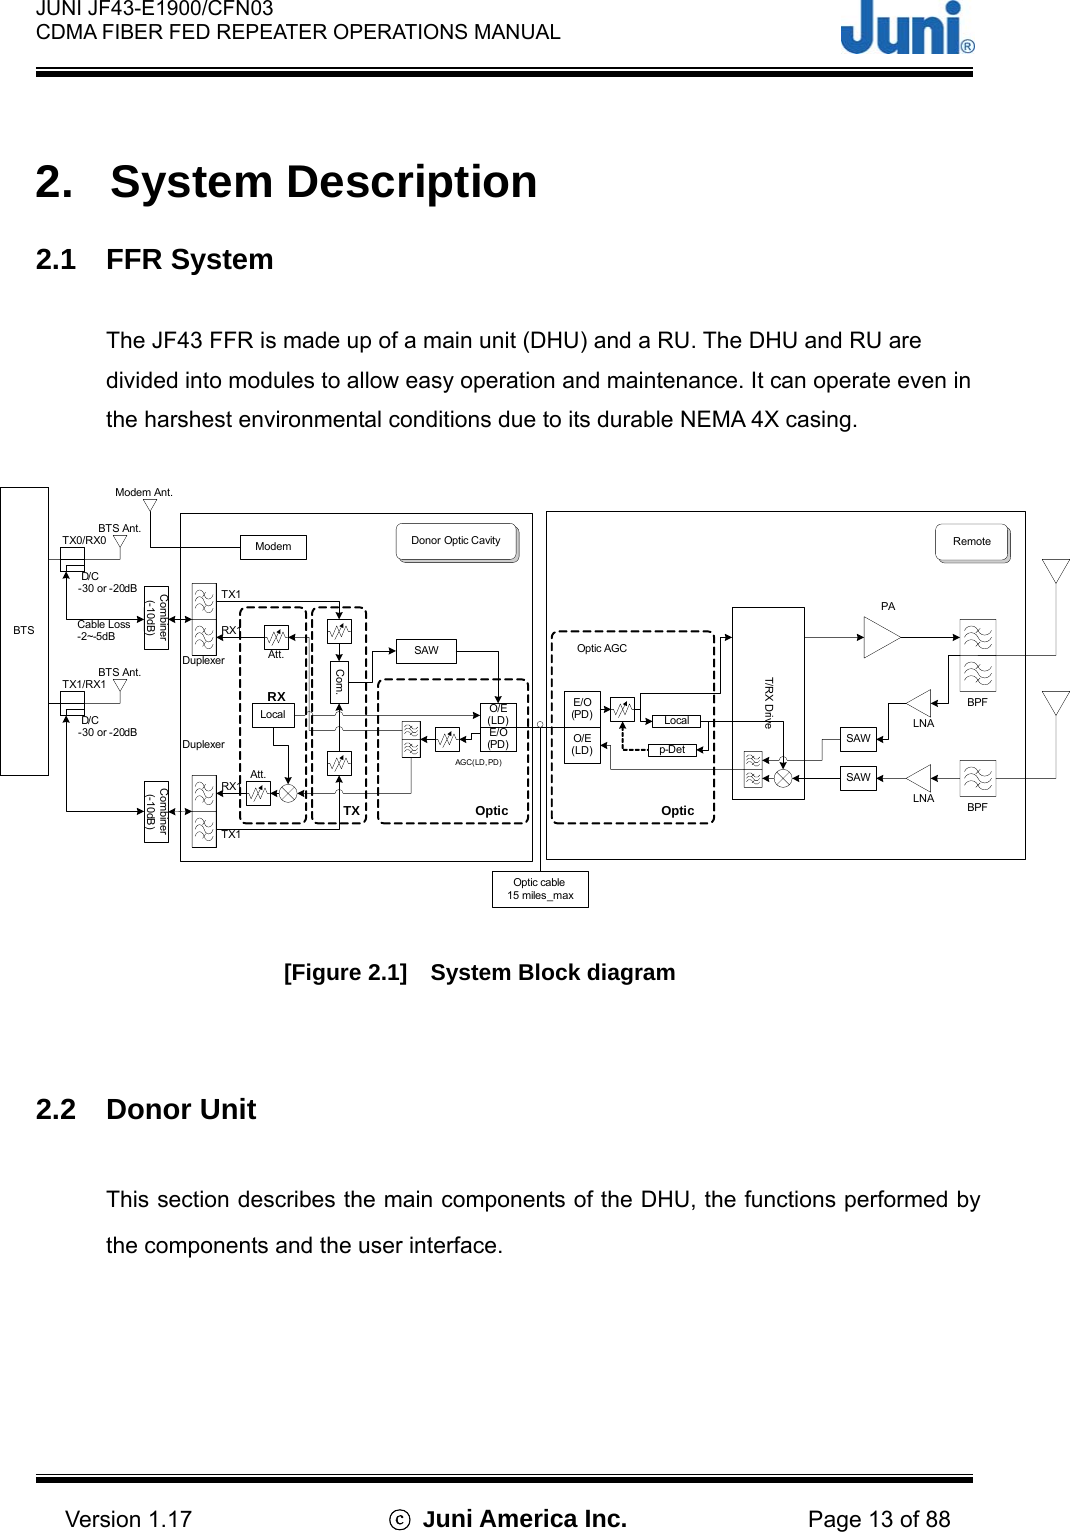  JUNI JF43-E1900/CFN03 CDMA FIBER FED REPEATER OPERATIONS MANUAL                                    Version 1.17  ⓒ Juni America Inc. Page 13 of 88  2. System Description  2.1 FFR System  The JF43 FFR is made up of a main unit (DHU) and a RU. The DHU and RU are divided into modules to allow easy operation and maintenance. It can operate even in the harshest environmental conditions due to its durable NEMA 4X casing.  TX0/RX0TX1/RX1BTSBTS Ant.-30 or -20dBBTS Ant.D/CD/CCable Loss-2~-5dBTX1DuplexerOpticO/E(LD)E/O(PD)RemotePALNALNA BPFBPFOptic AGC-30 or -20dBDuplexerRX1TX1O/E(LD)E/O(PD)AGC(LD,PD)SAWDonor Optic CavityOptic cable15 miles_maxSAWSAWModemModem Ant.Localp-DetT/RX DriveRXAtt.Att.LocalCom.TXRX1OpticCombiner (-10dB)Combiner (-10dB) [Figure 2.1]    System Block diagram   2.2 Donor Unit  This section describes the main components of the DHU, the functions performed by the components and the user interface.  